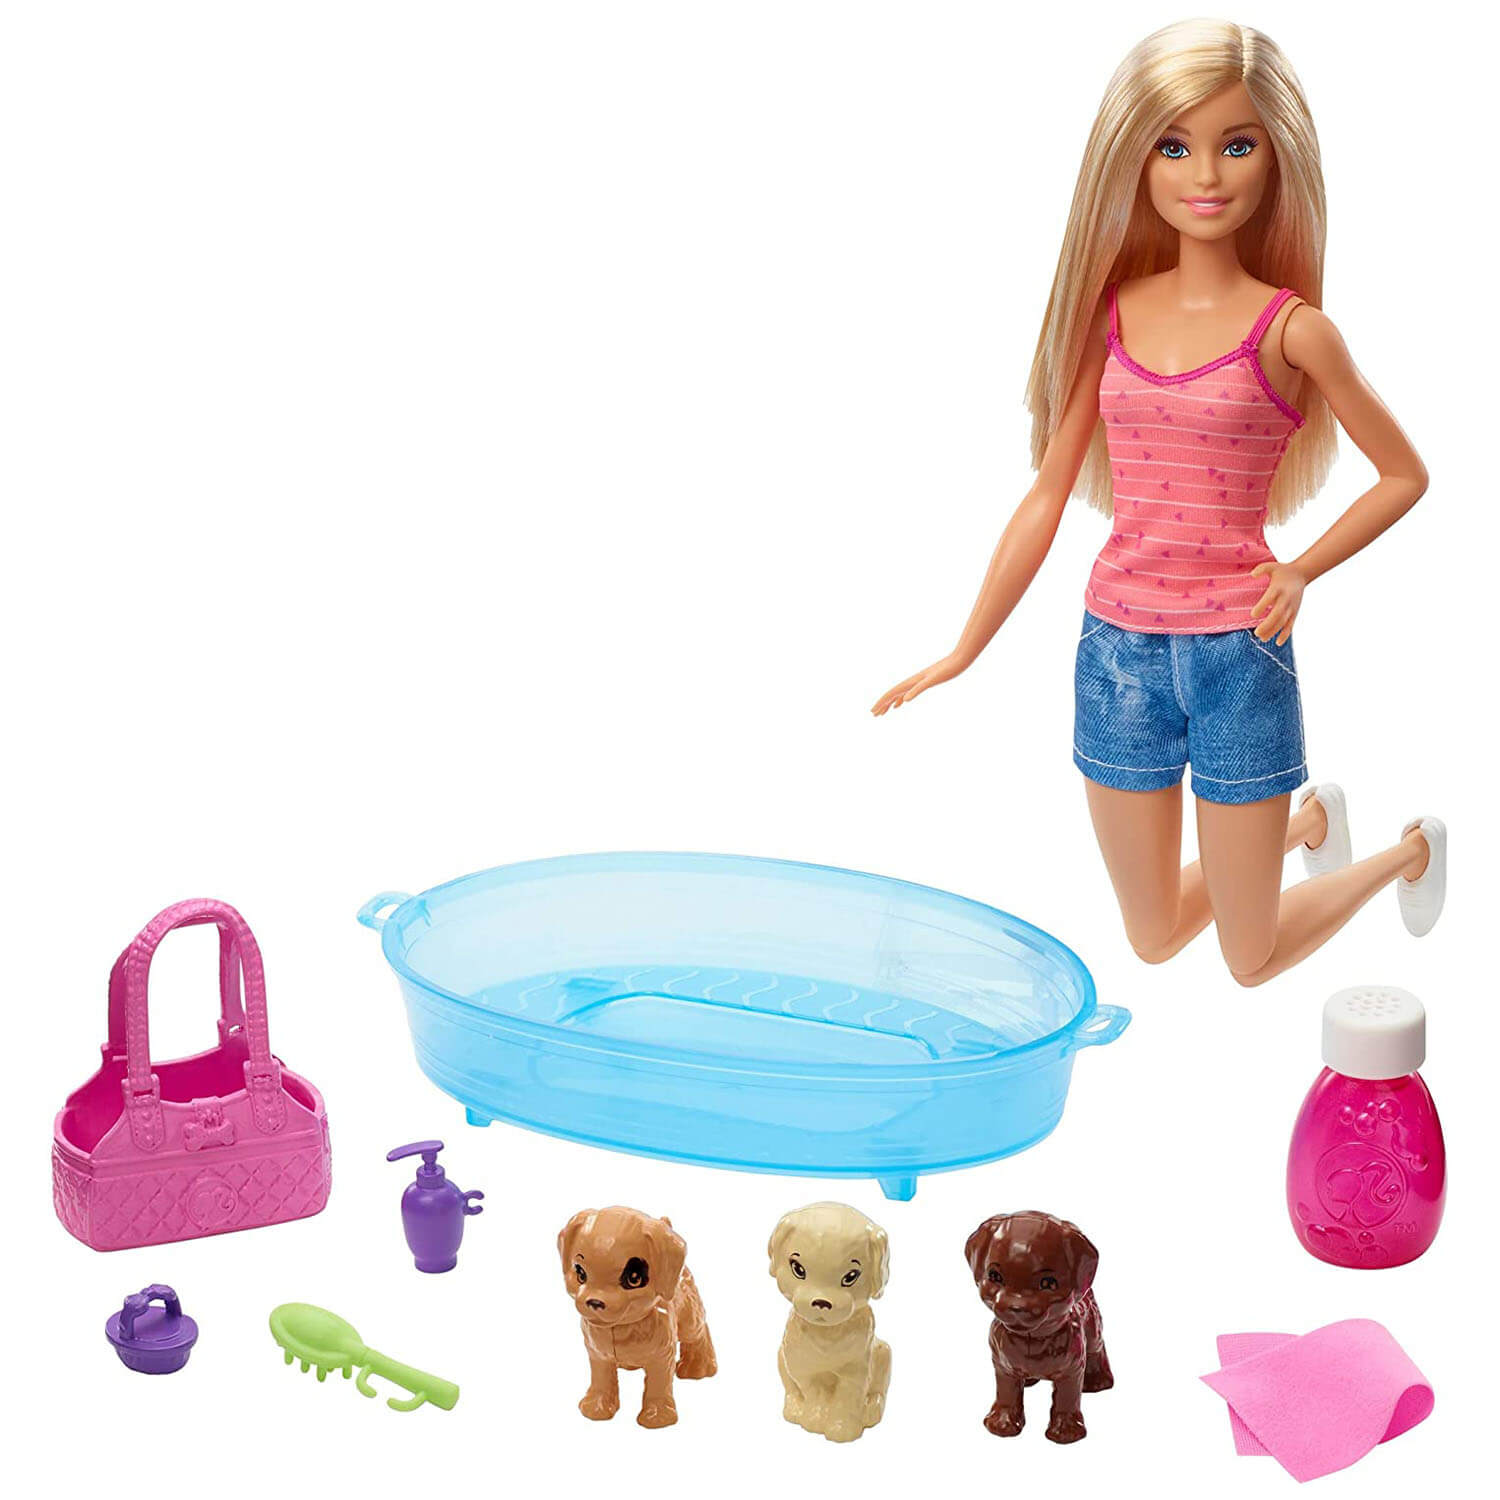 Barbie Doll With Pets and Accessories